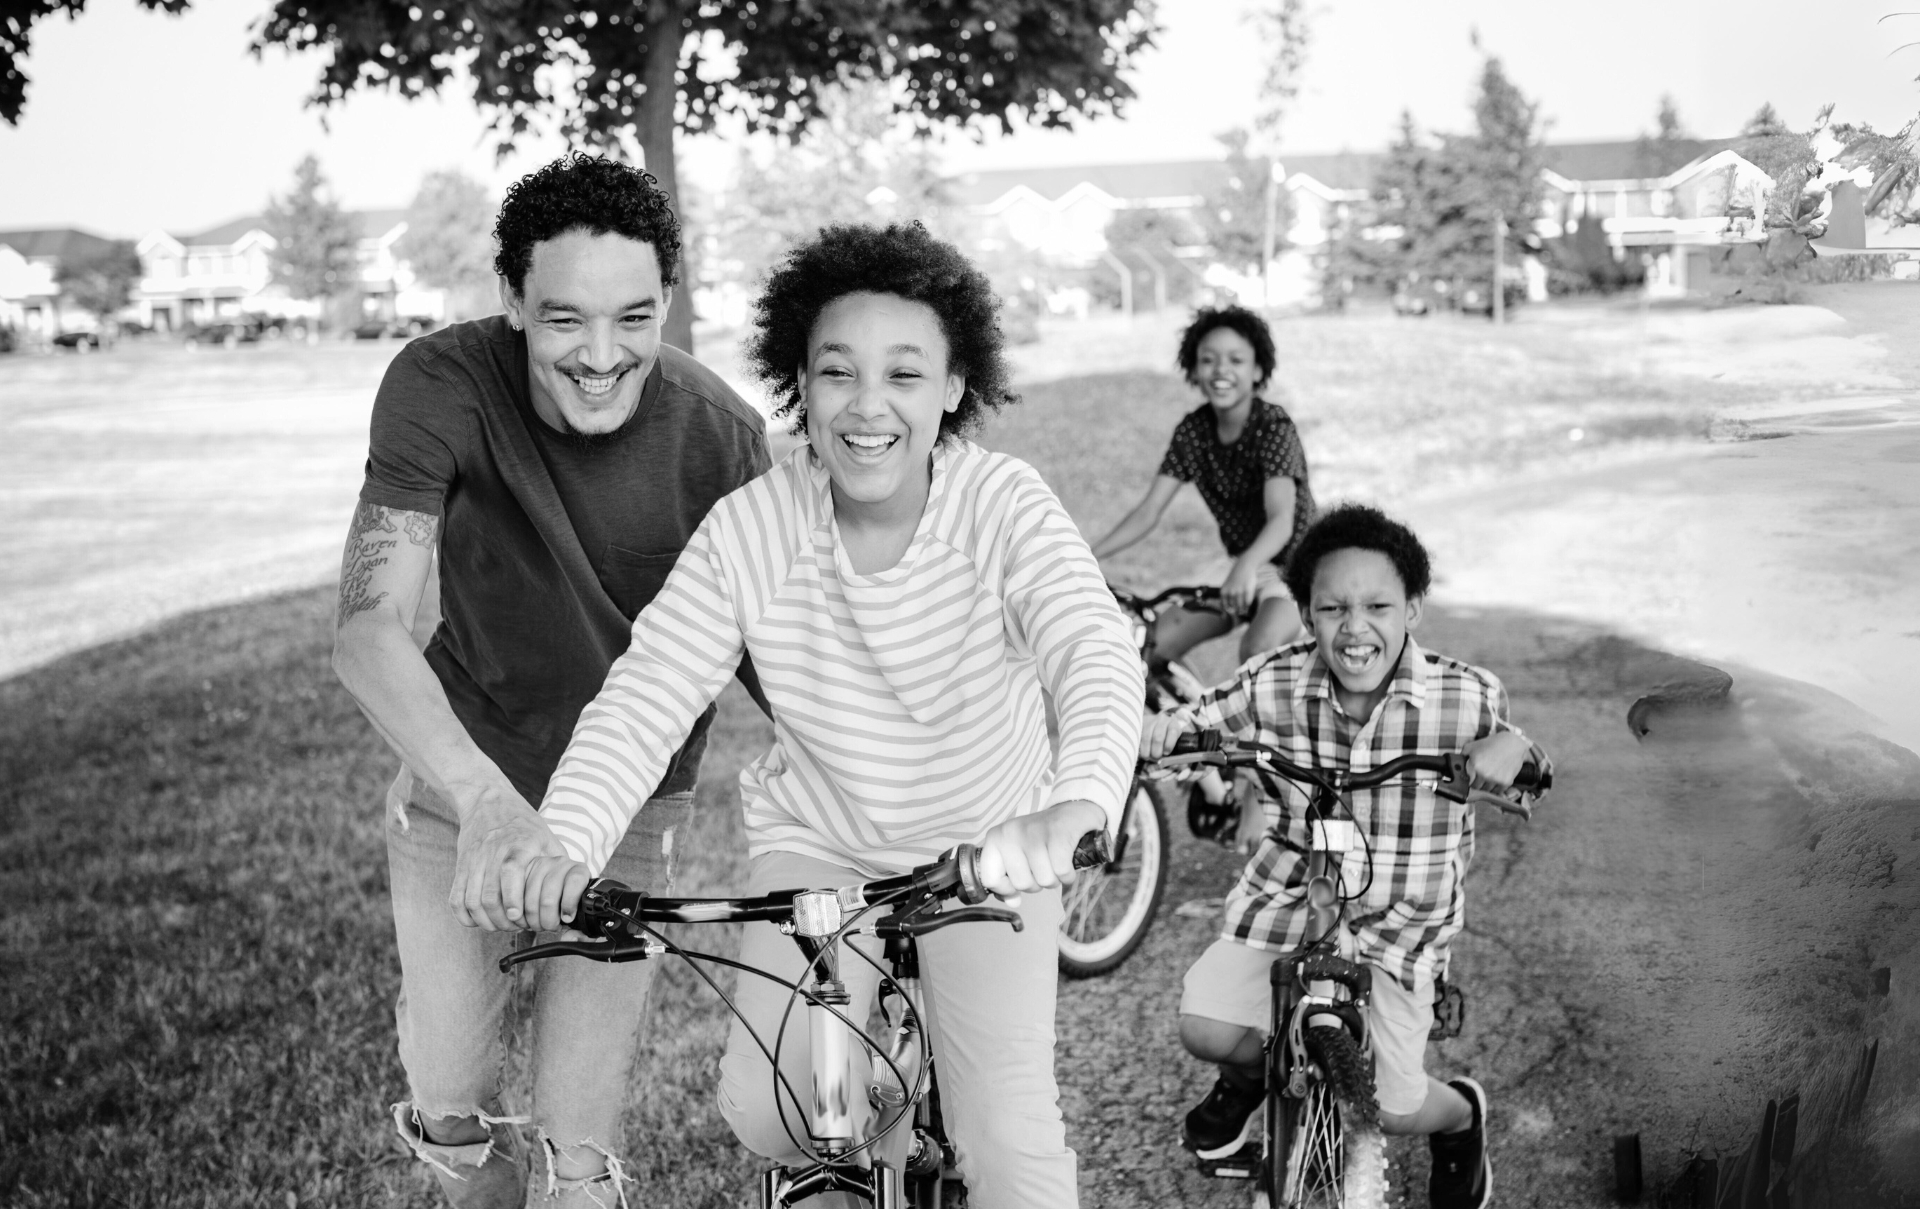 an adult helps a child ride a bike, while 2 other kids ride behind